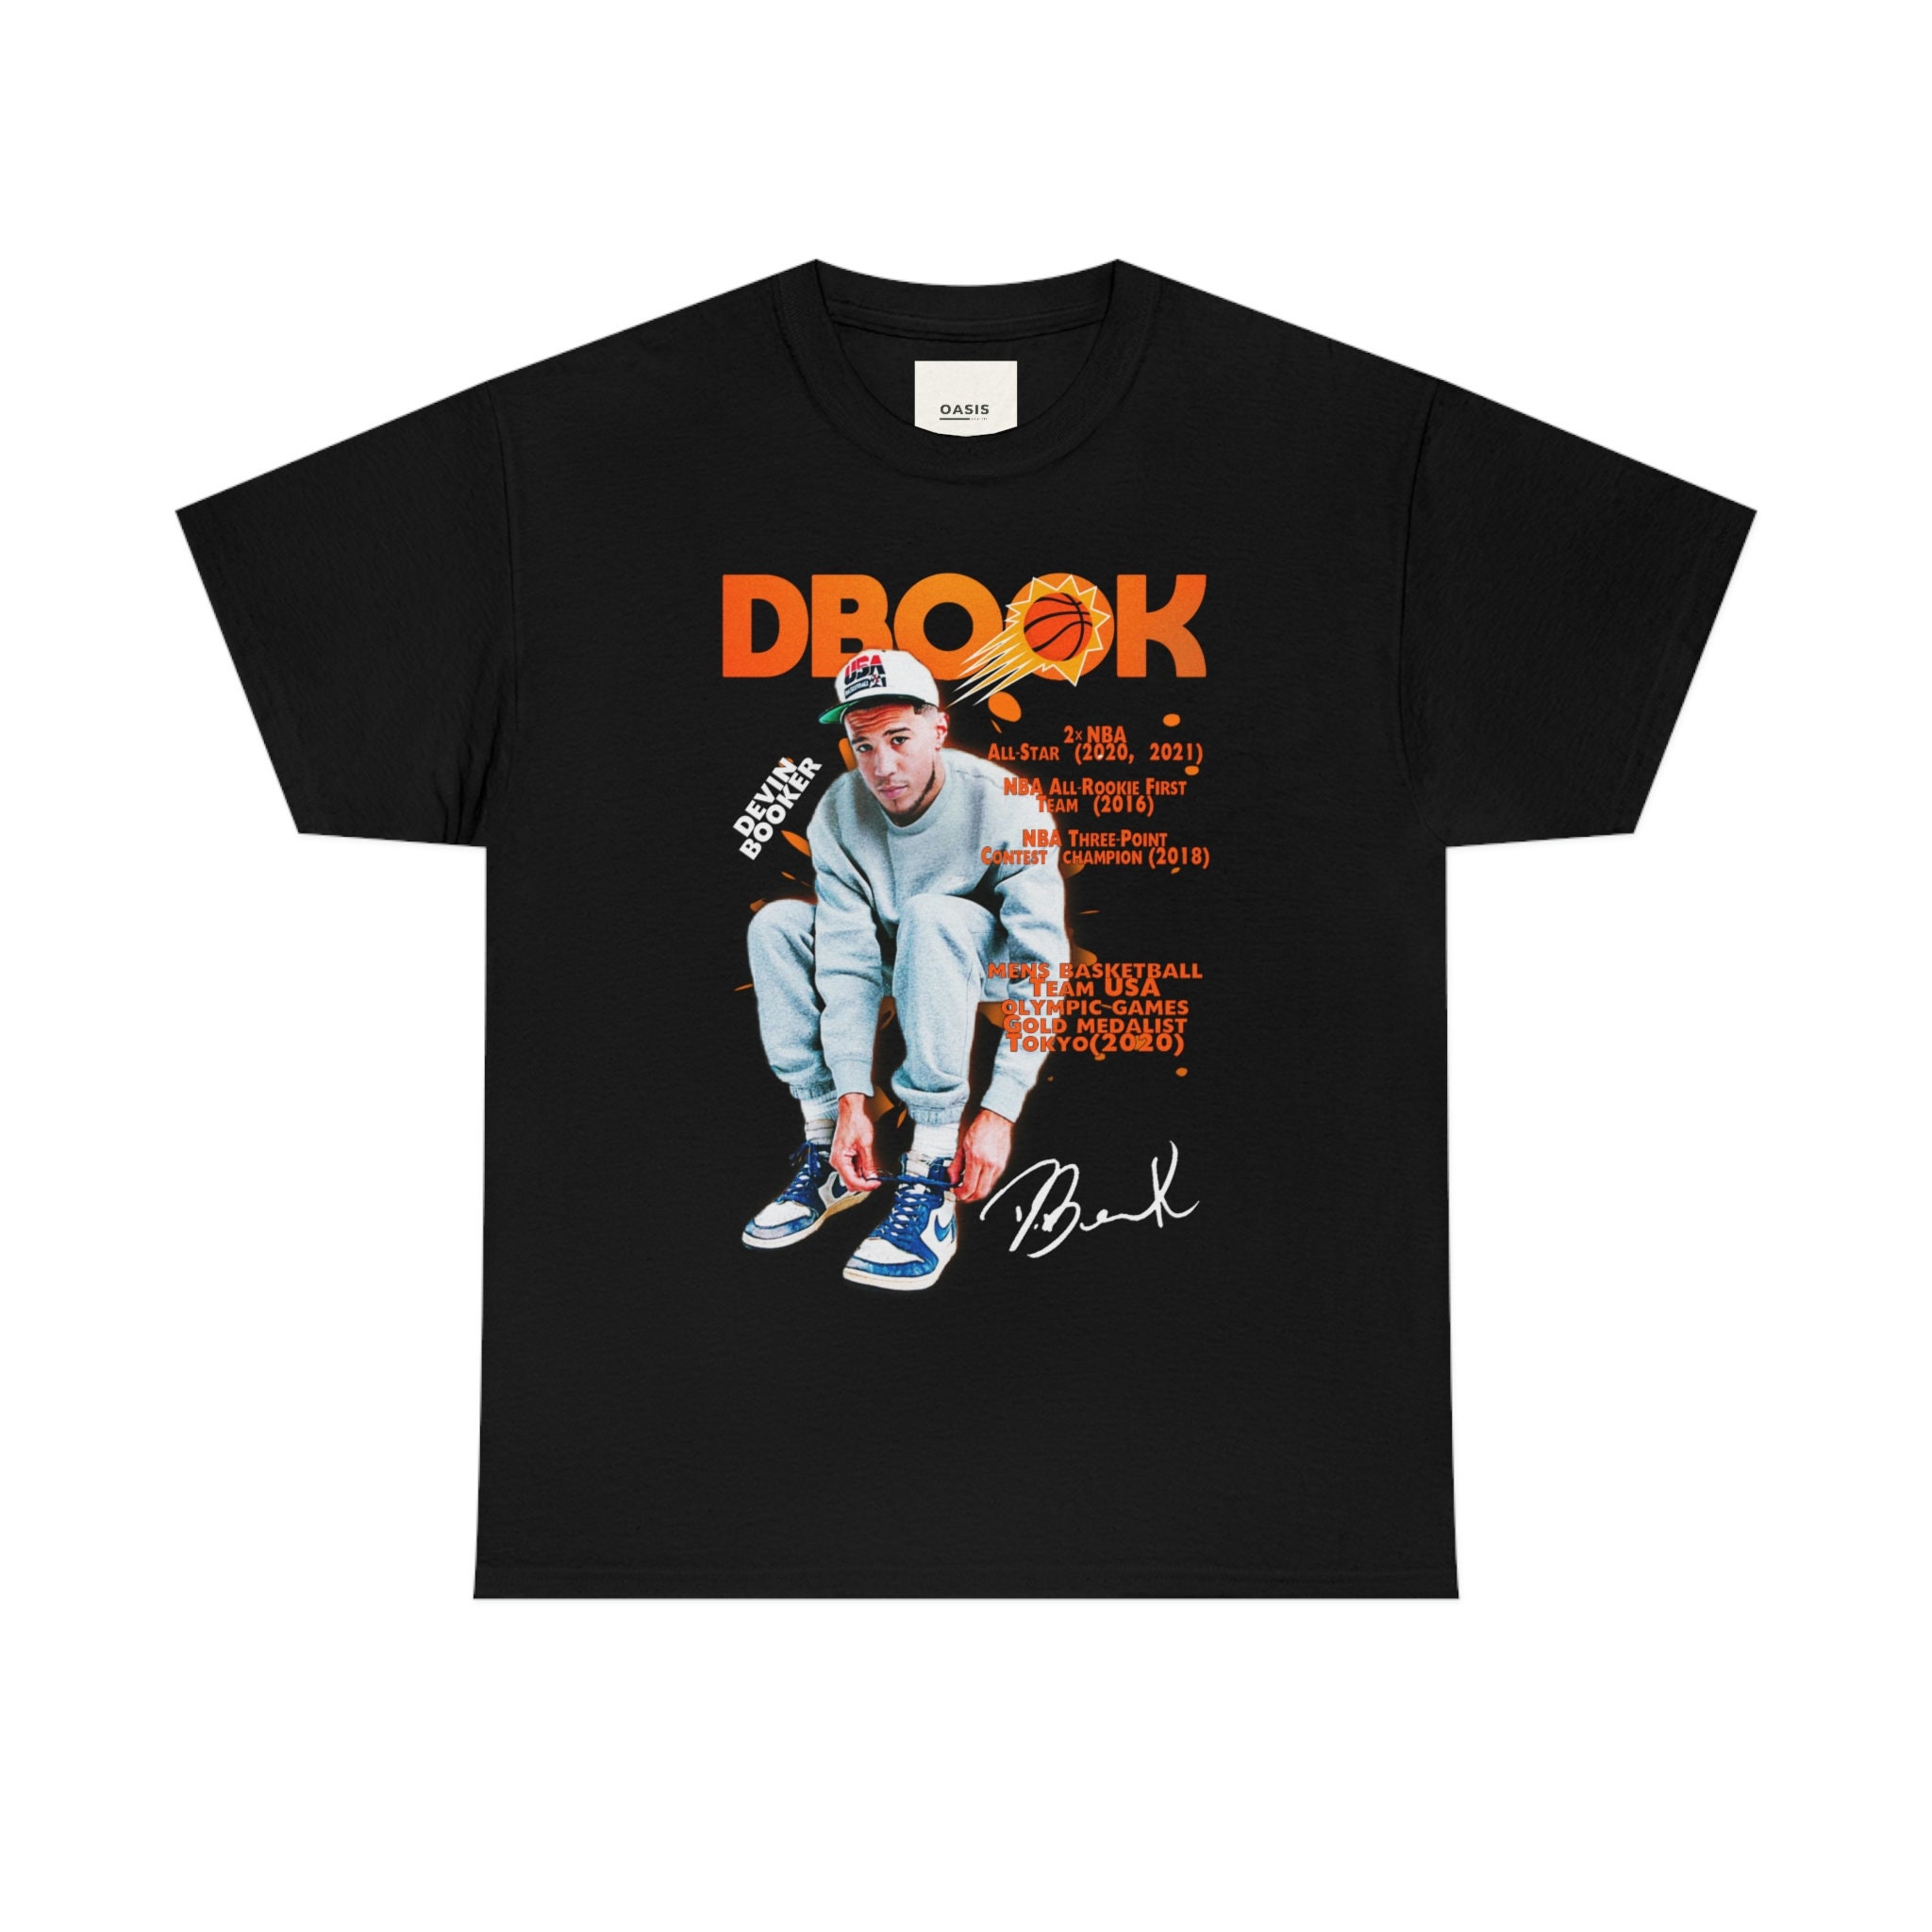 Devin Booker Shirt 90S Vintage X Bootleg Style - Anynee